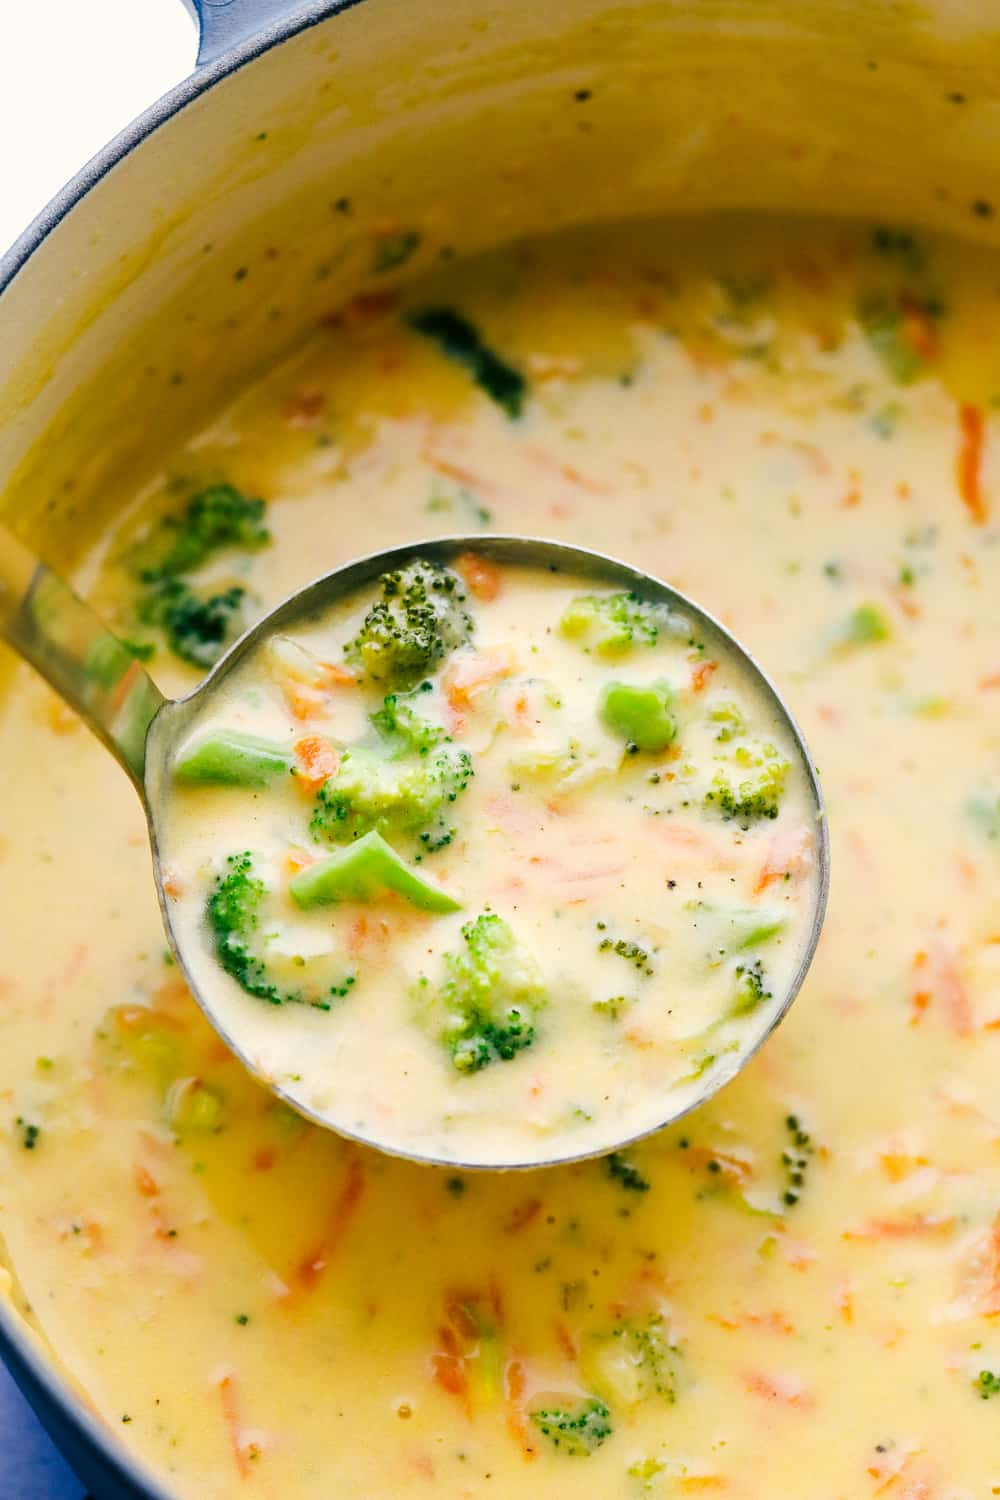 Recipes Broccoli Cheese Soup
 The Best Broccoli Cheese Soup Recipe